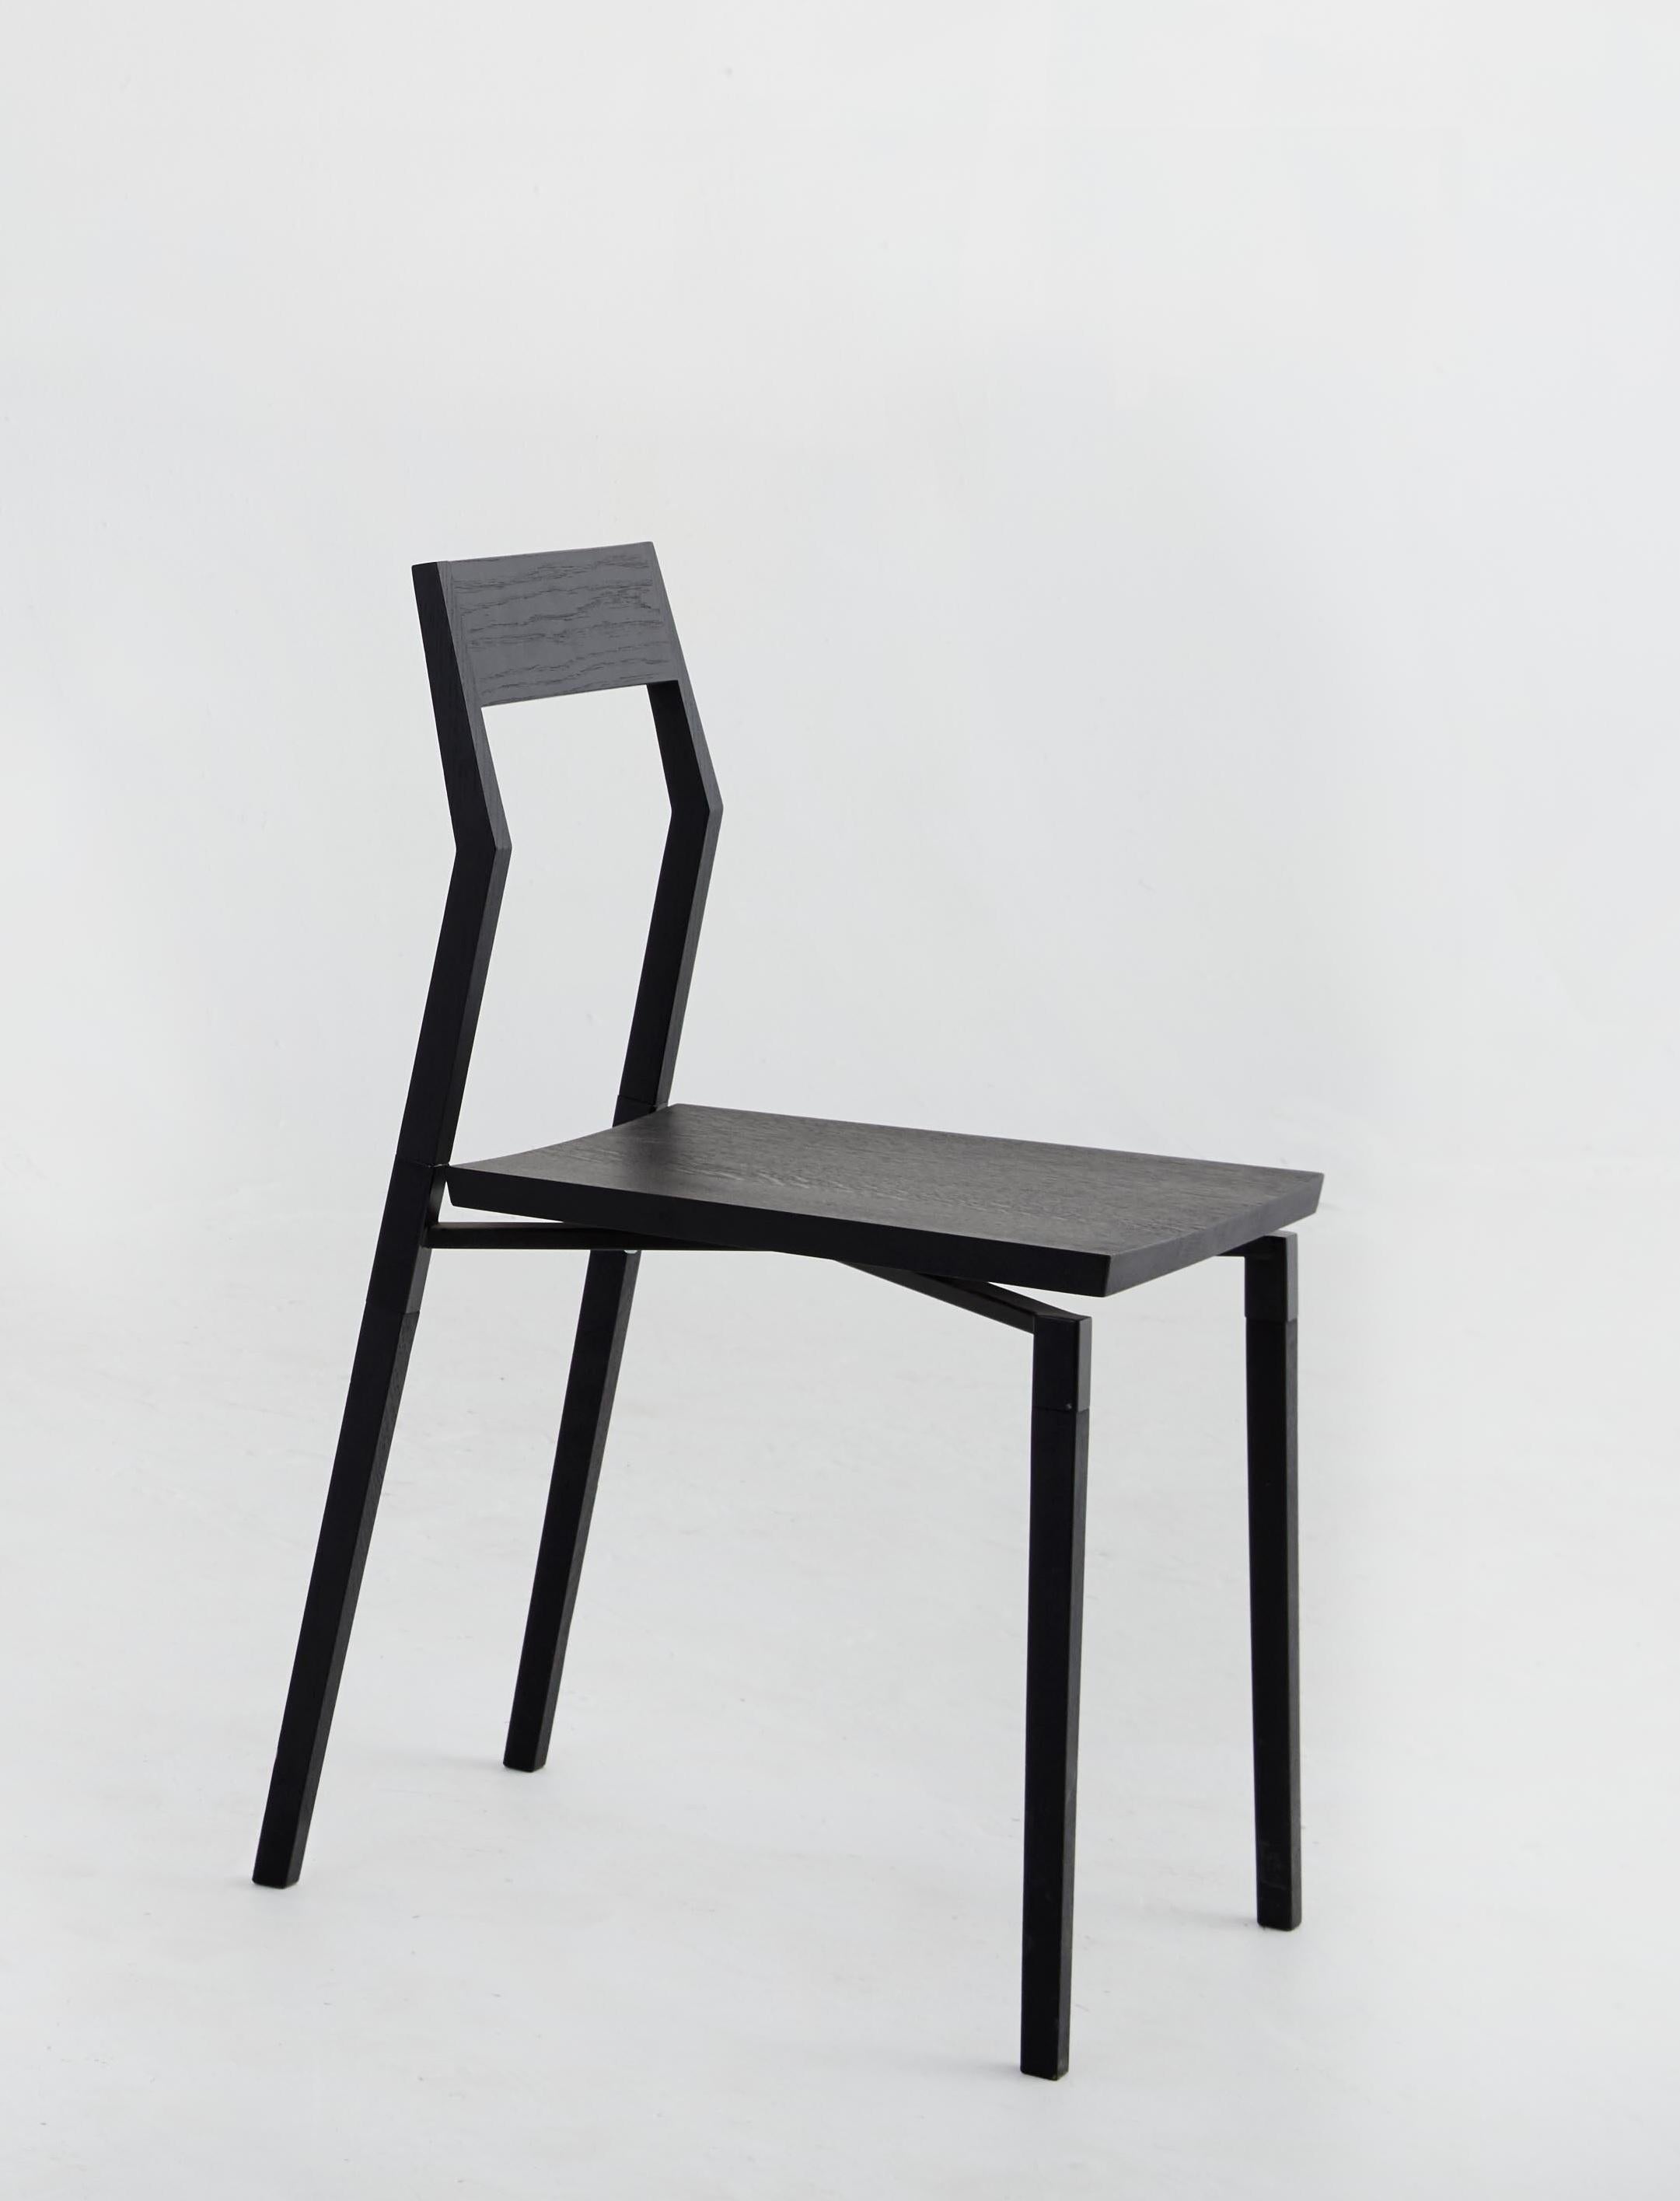 Walnut Parkdale dining chair by Hollis & Morris.
Dimensions: 18.5